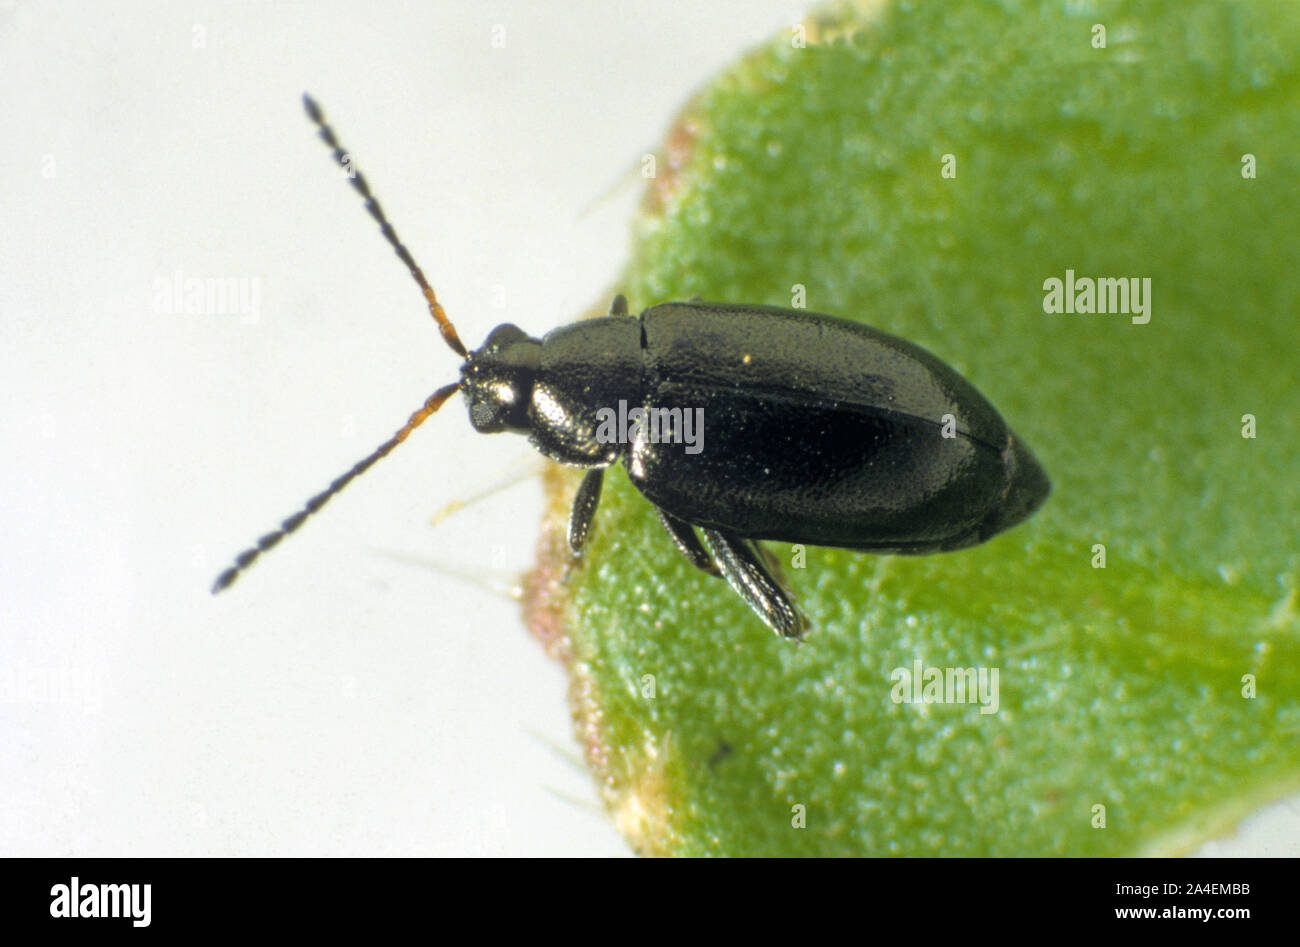 Flea beetle (Phyllotreta sp.)an adult beetle about to jump from the edge of a leaf, Stock Photo